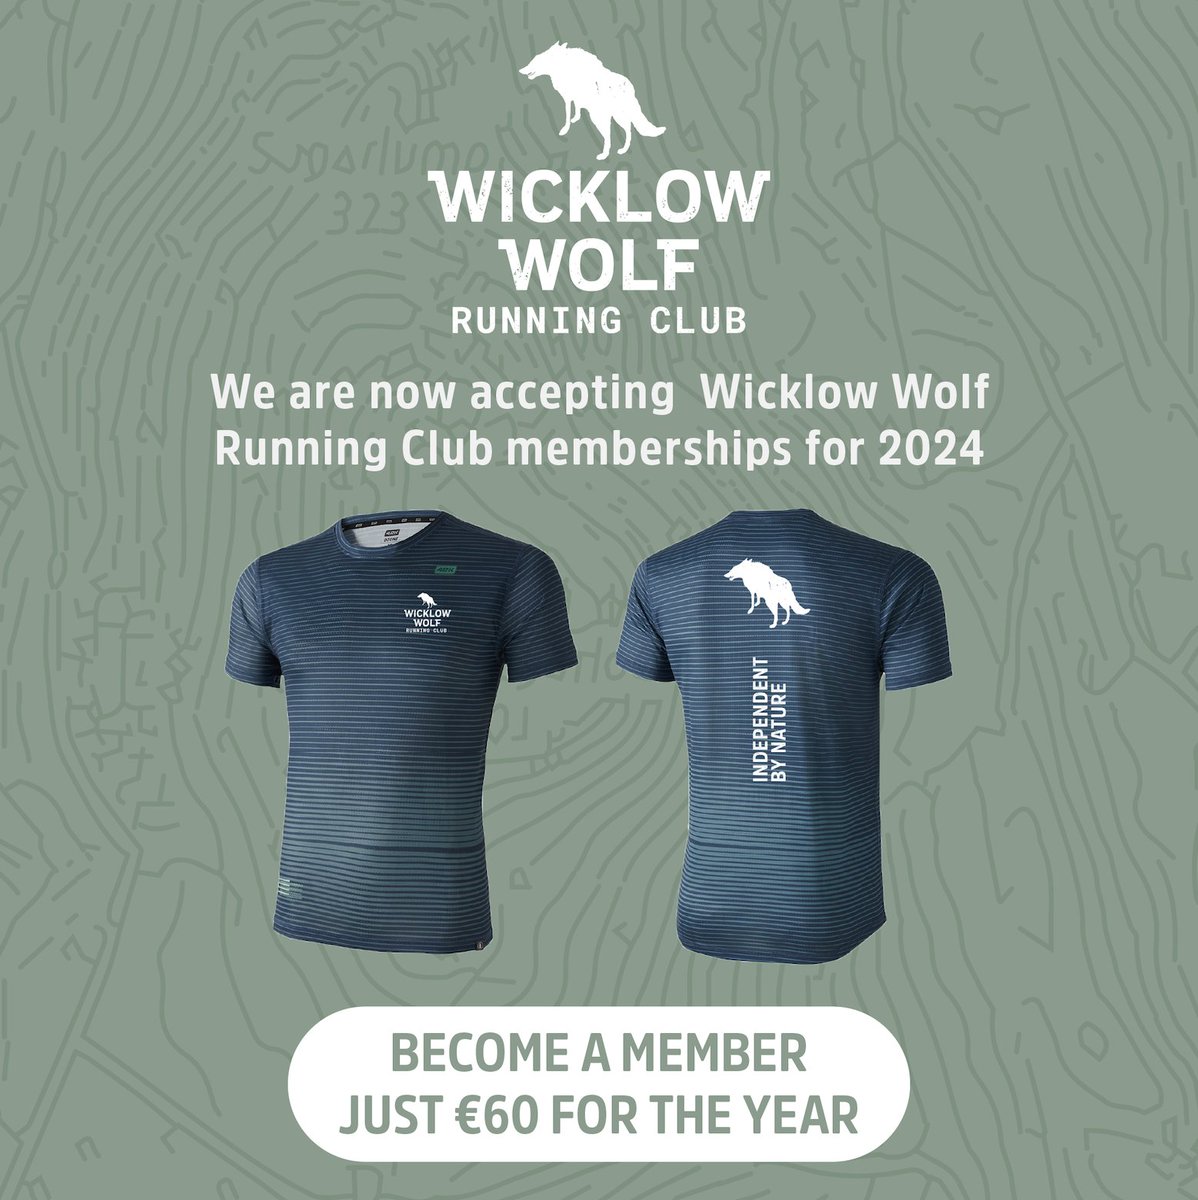 We have just opened up memberships to the Wicklow Wolf Running Club for 2024.

A fun, social running club focussed on getting our members out running on some of the best trails which Wicklow has to offer. Sign up now to receive your membership pack!

wicklowwolf.com/product/wicklo…